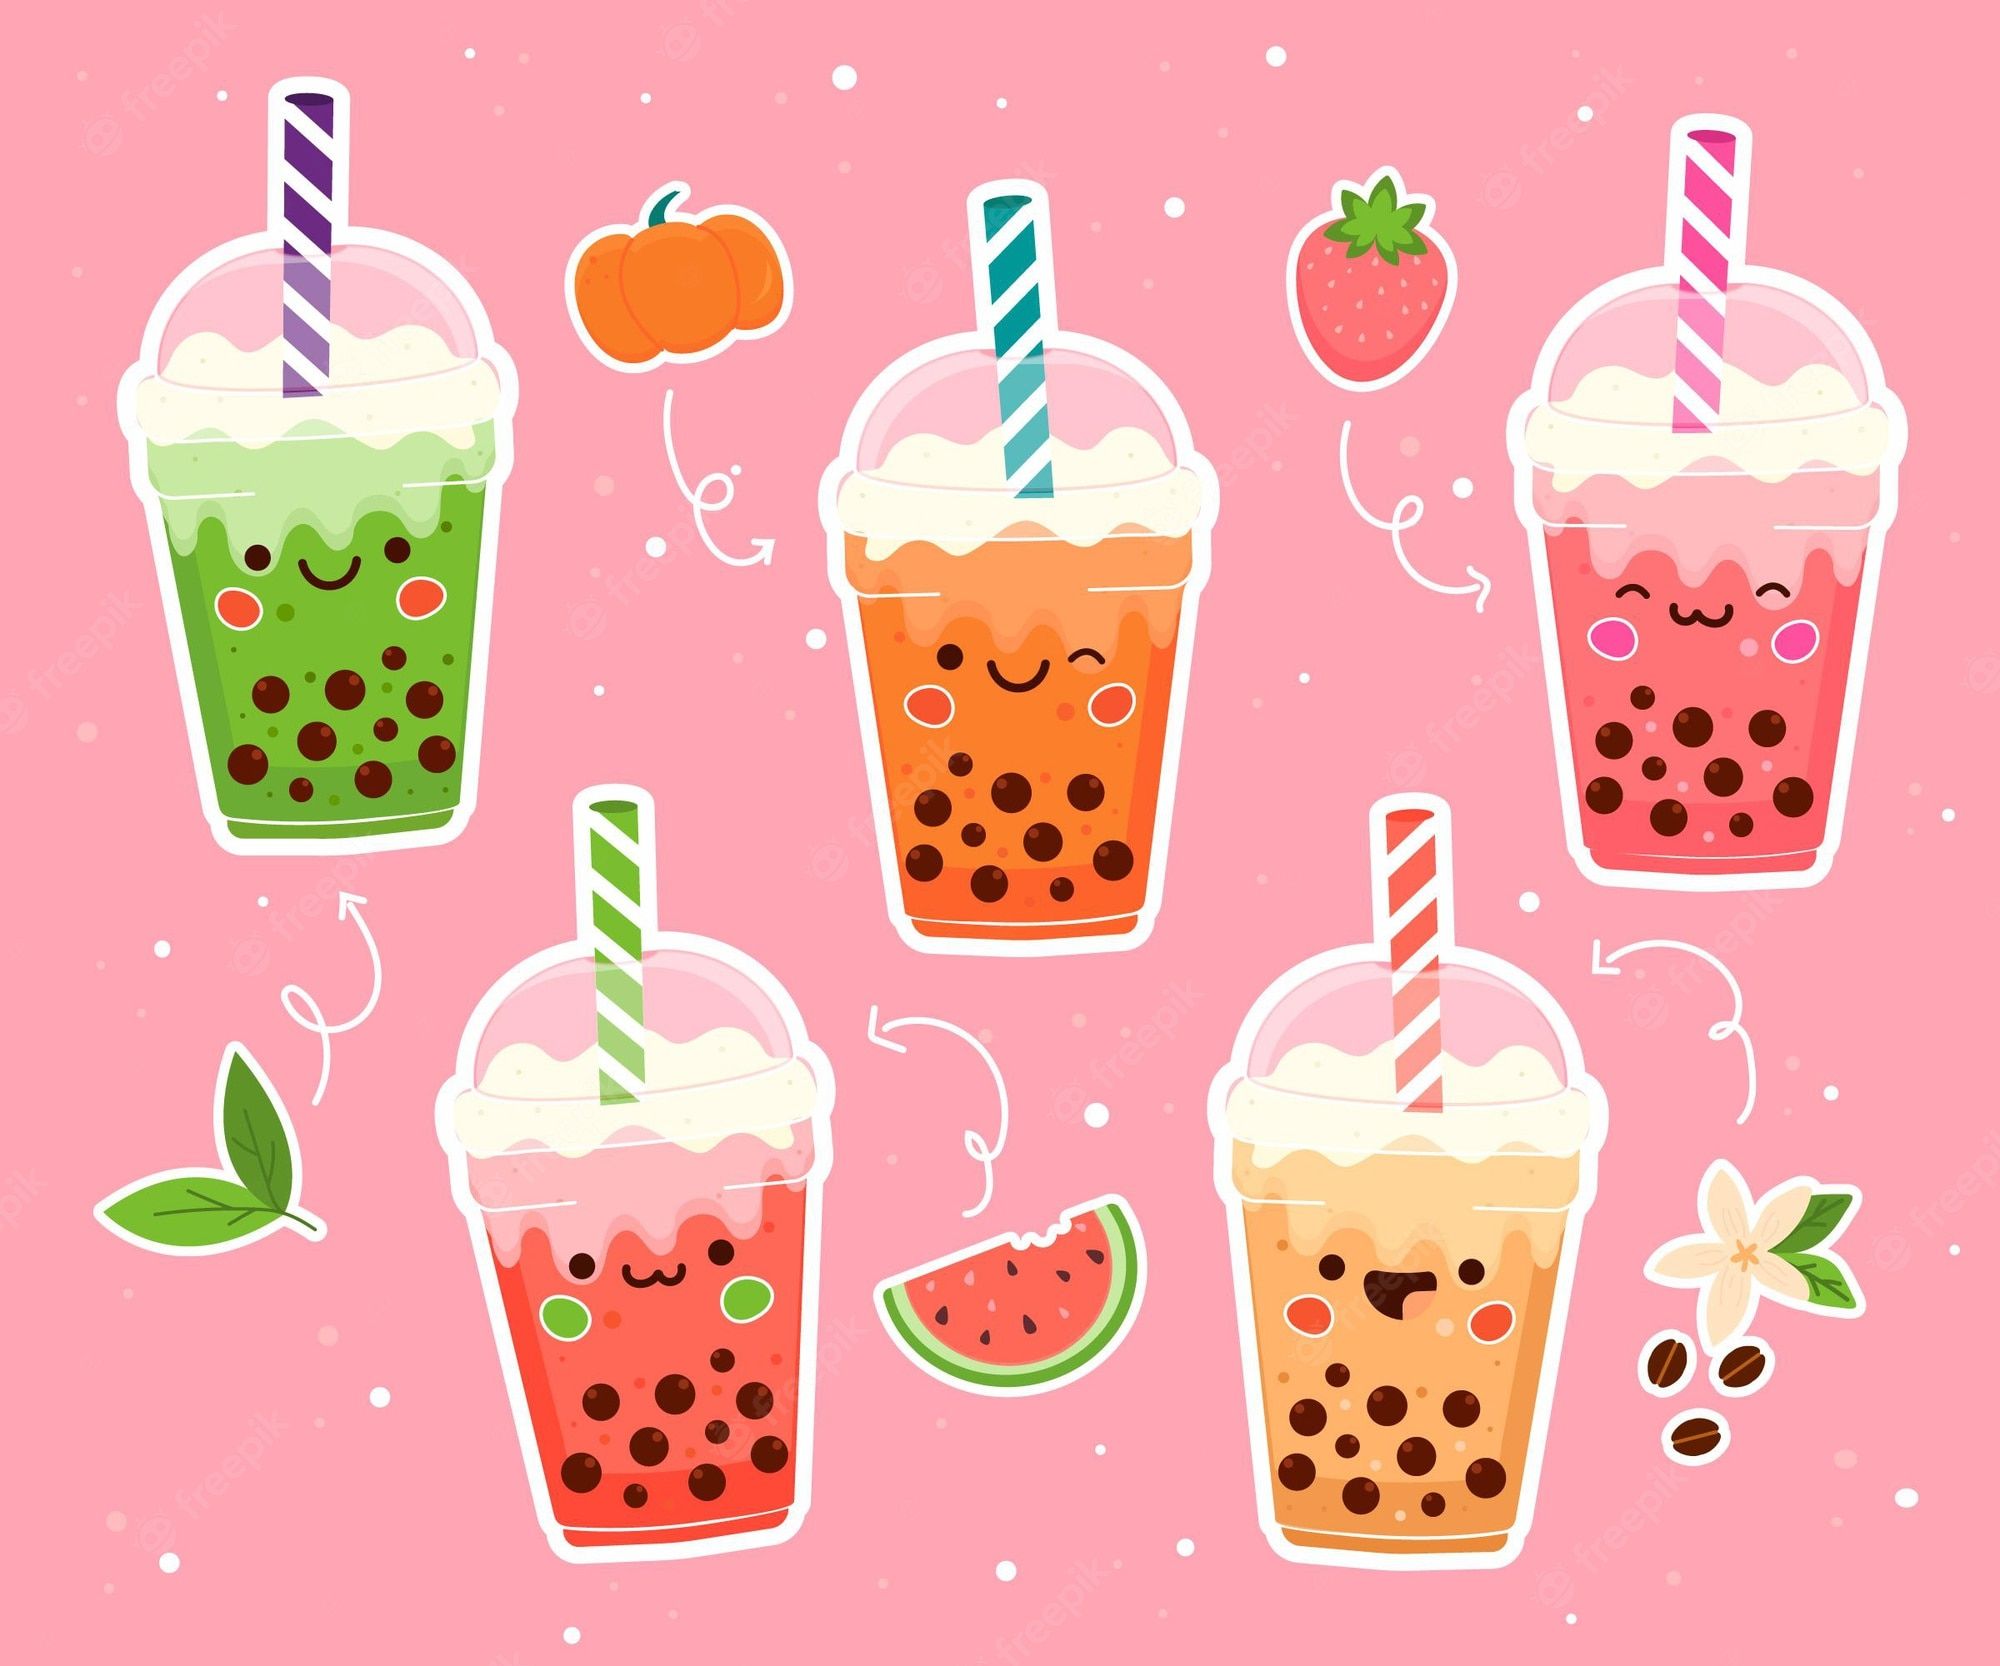 A cute illustration of bubble tea with different flavors - Boba